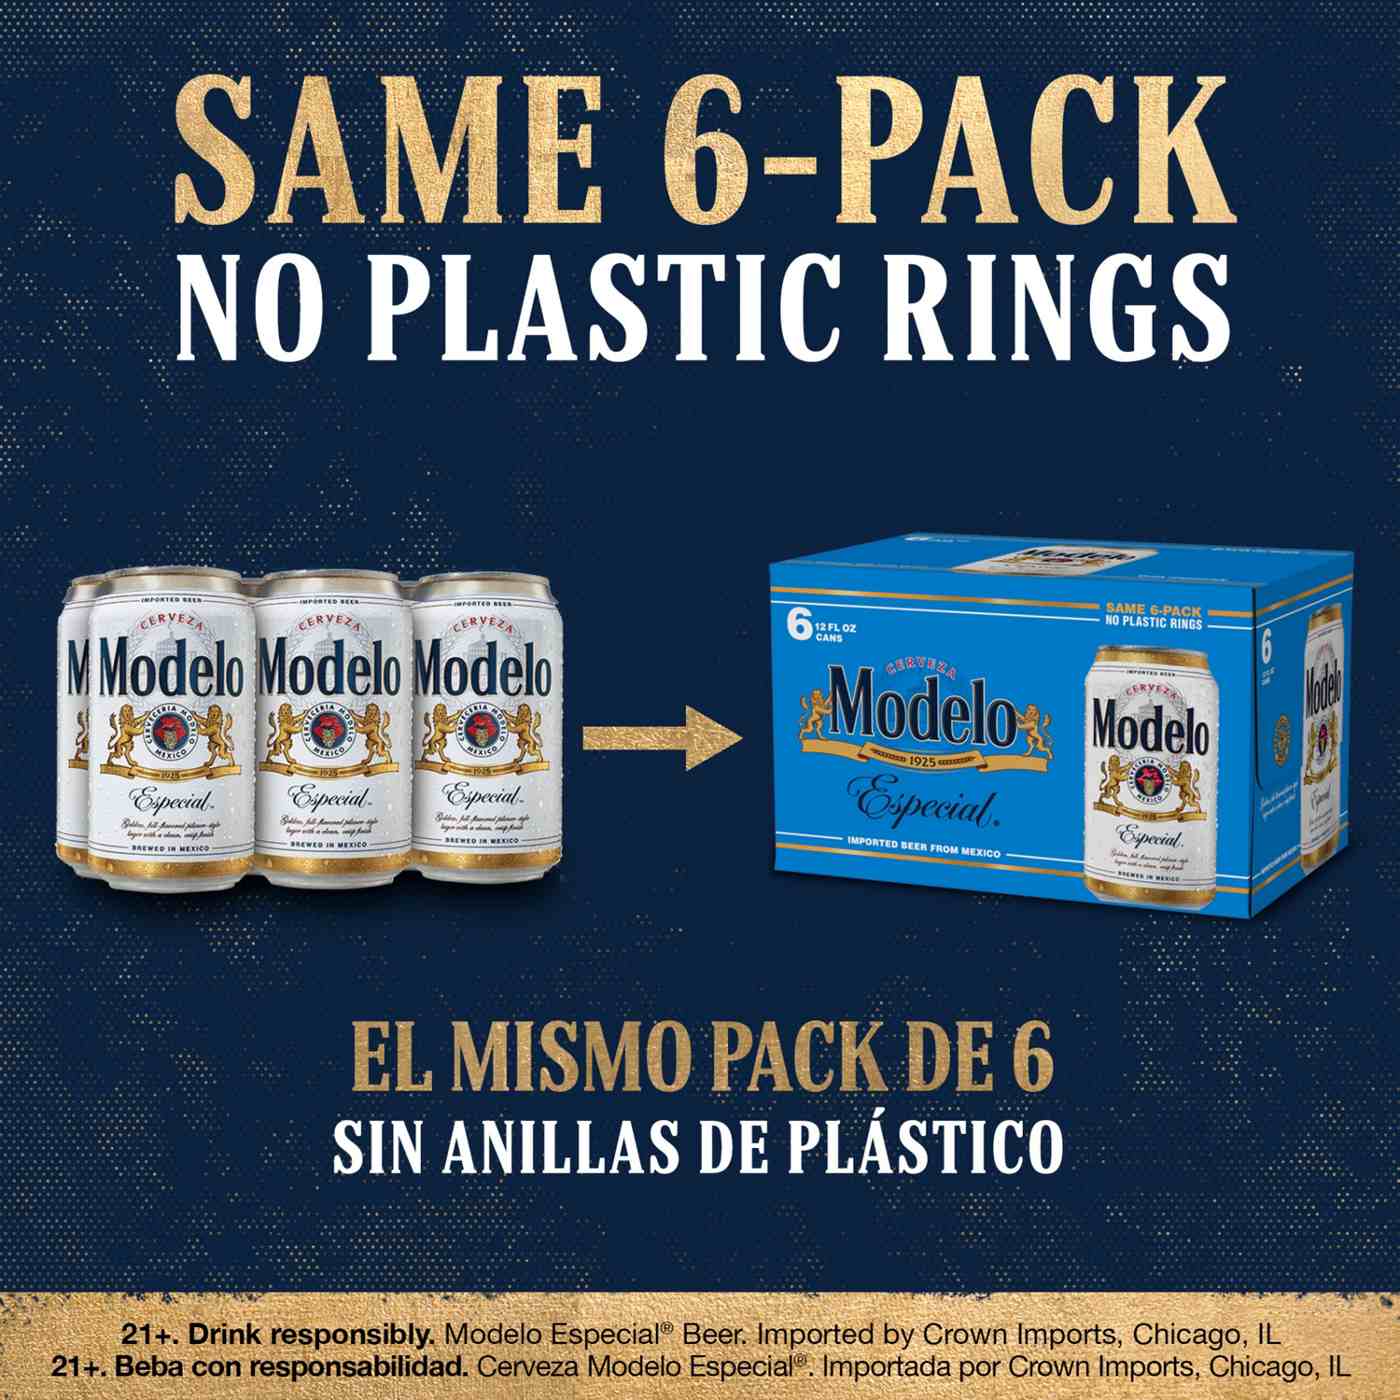 Modelo Especial Mexican Lager Import Beer 12 oz Cans, 6 pk; image 6 of 11